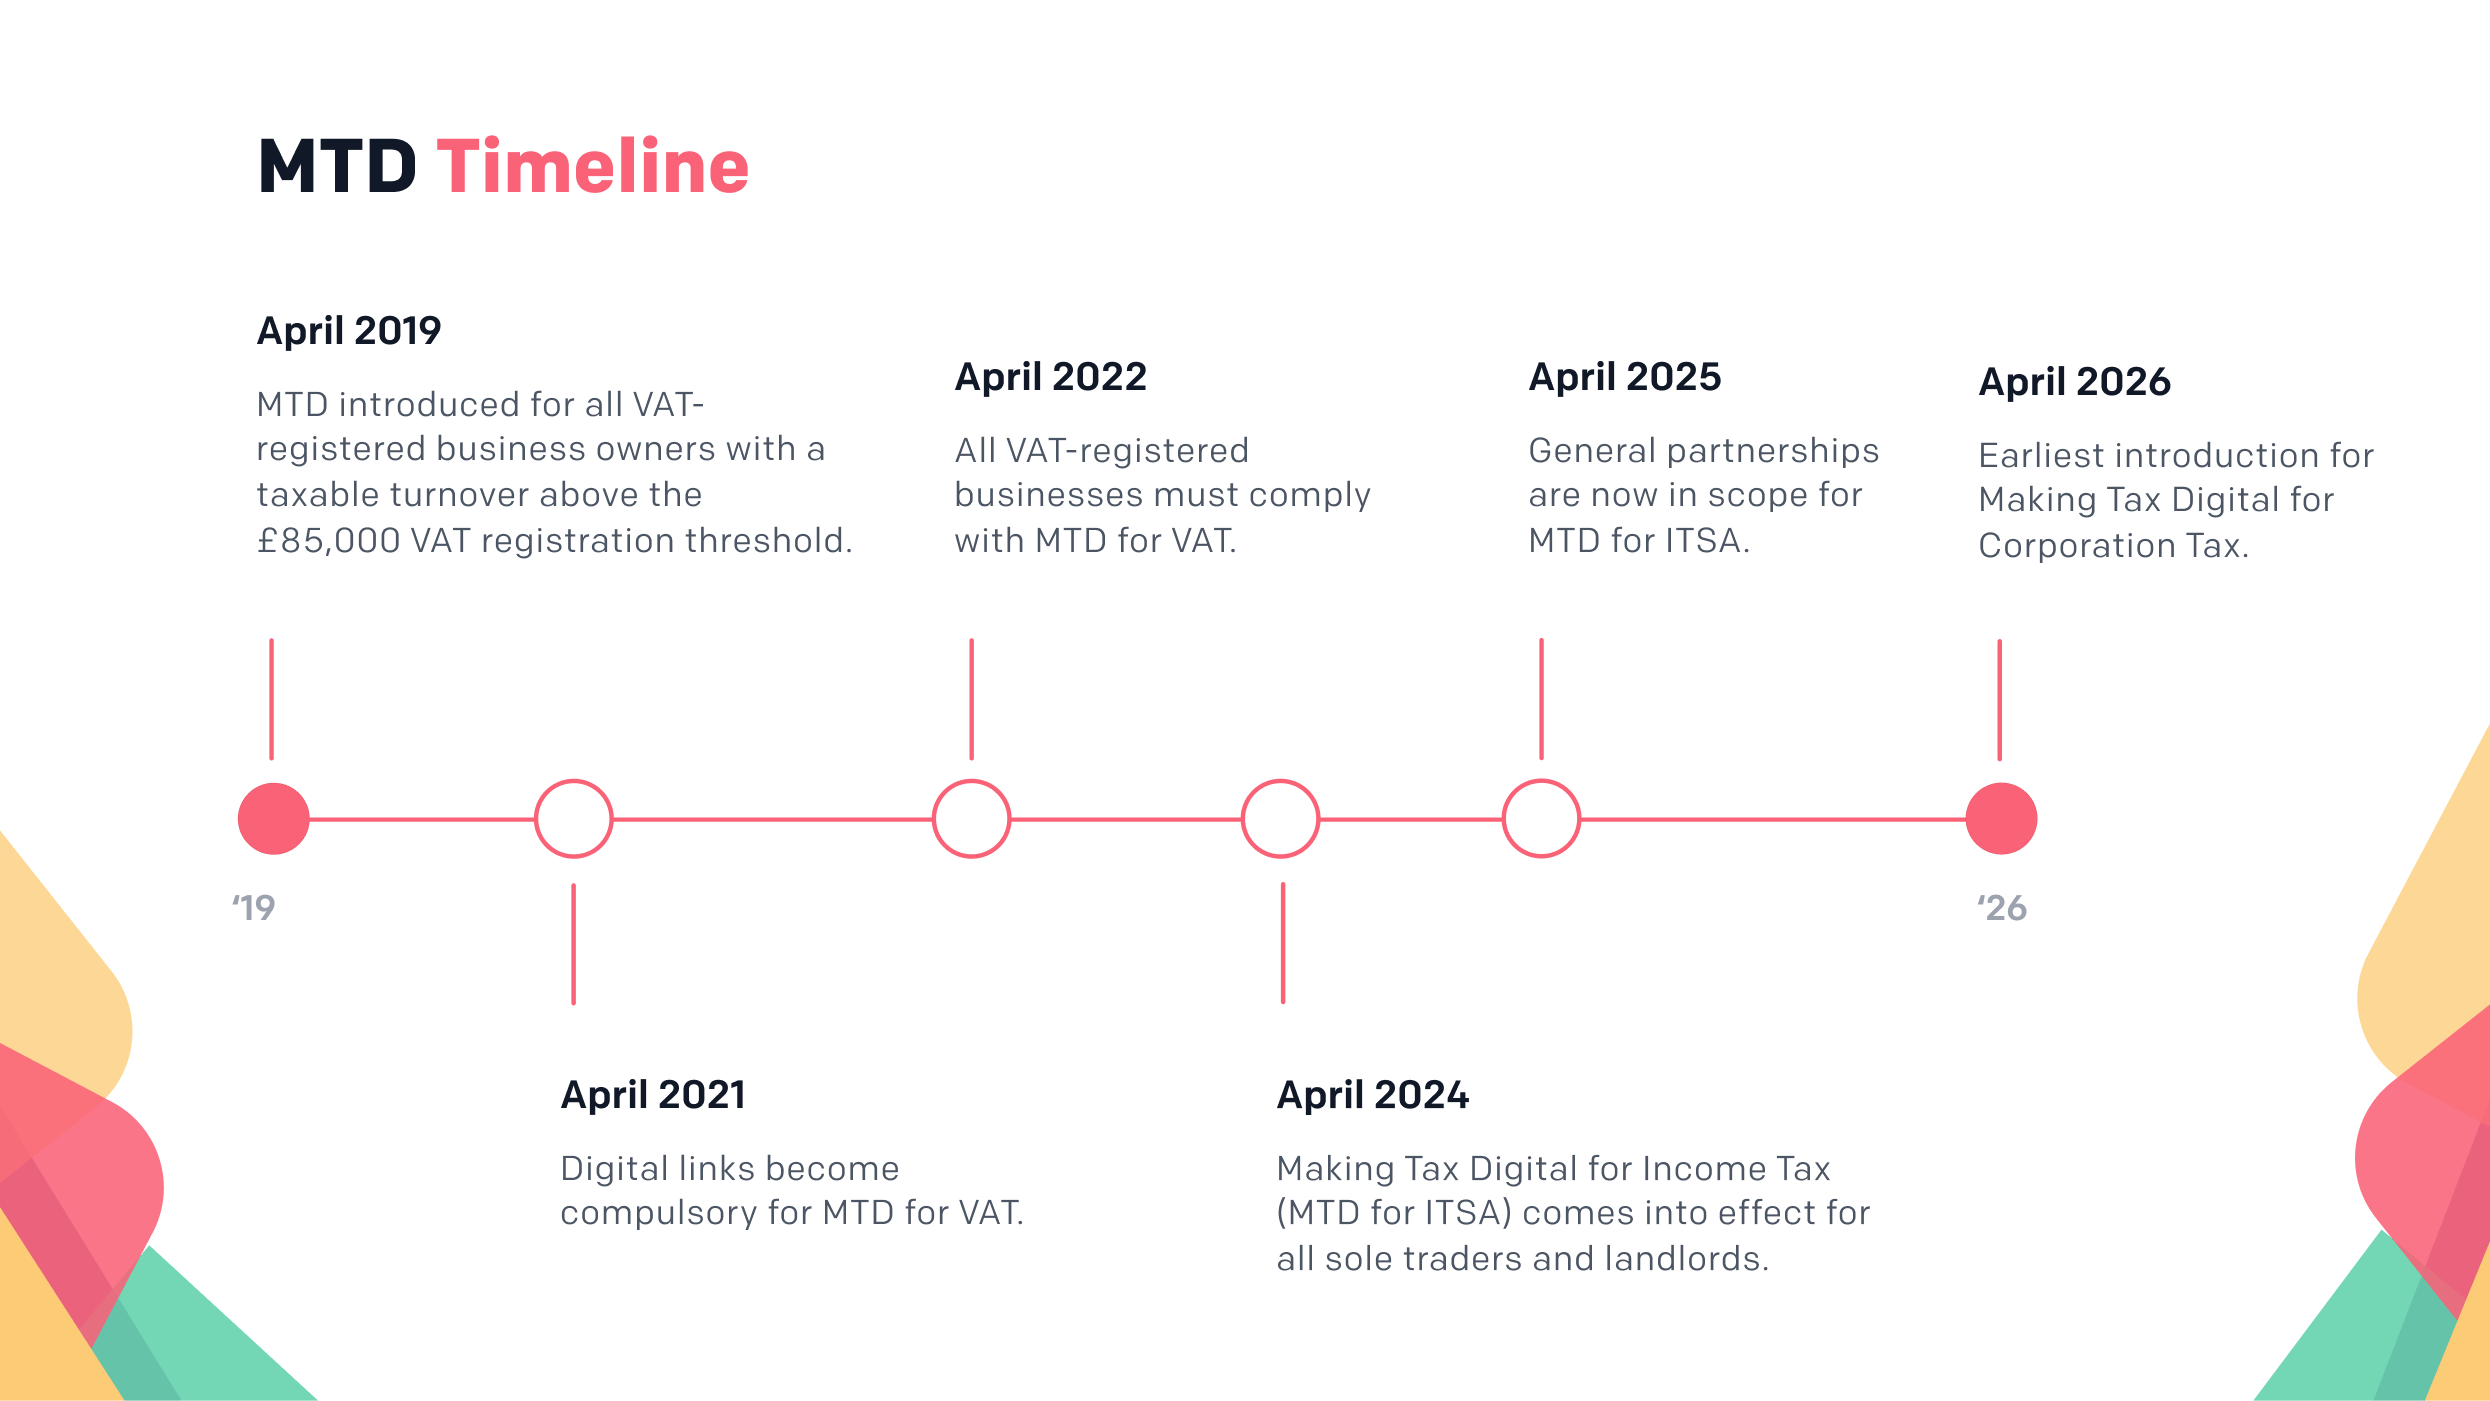 Making Tax Digital timeline from 2019 to 2026